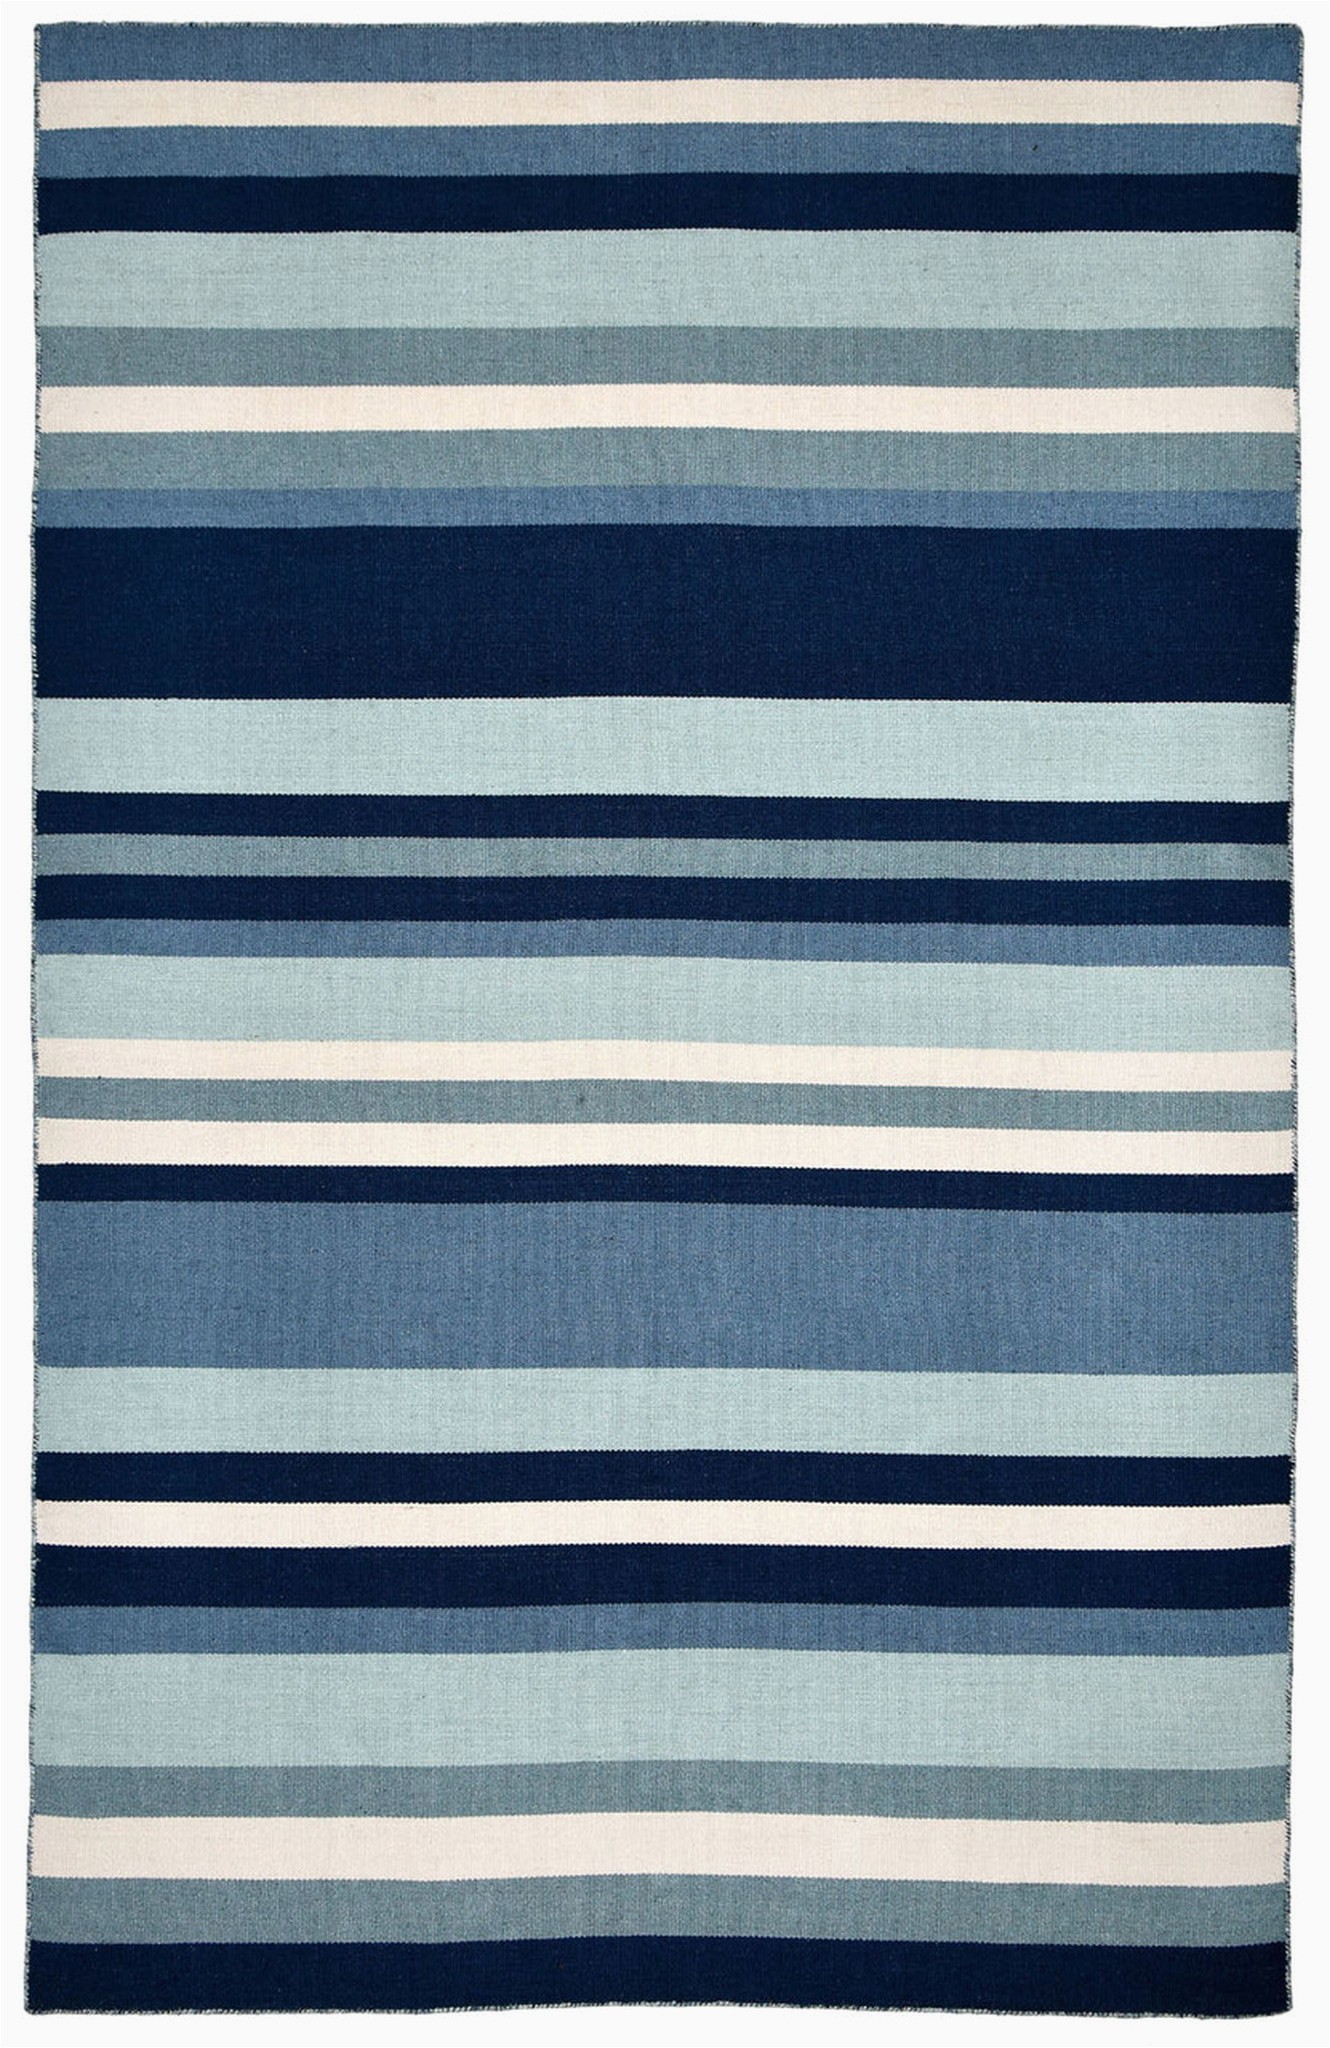 Navy Blue and White Striped Rug Tribeca Water Blue Striped Woven Indoor Outdoor Rug